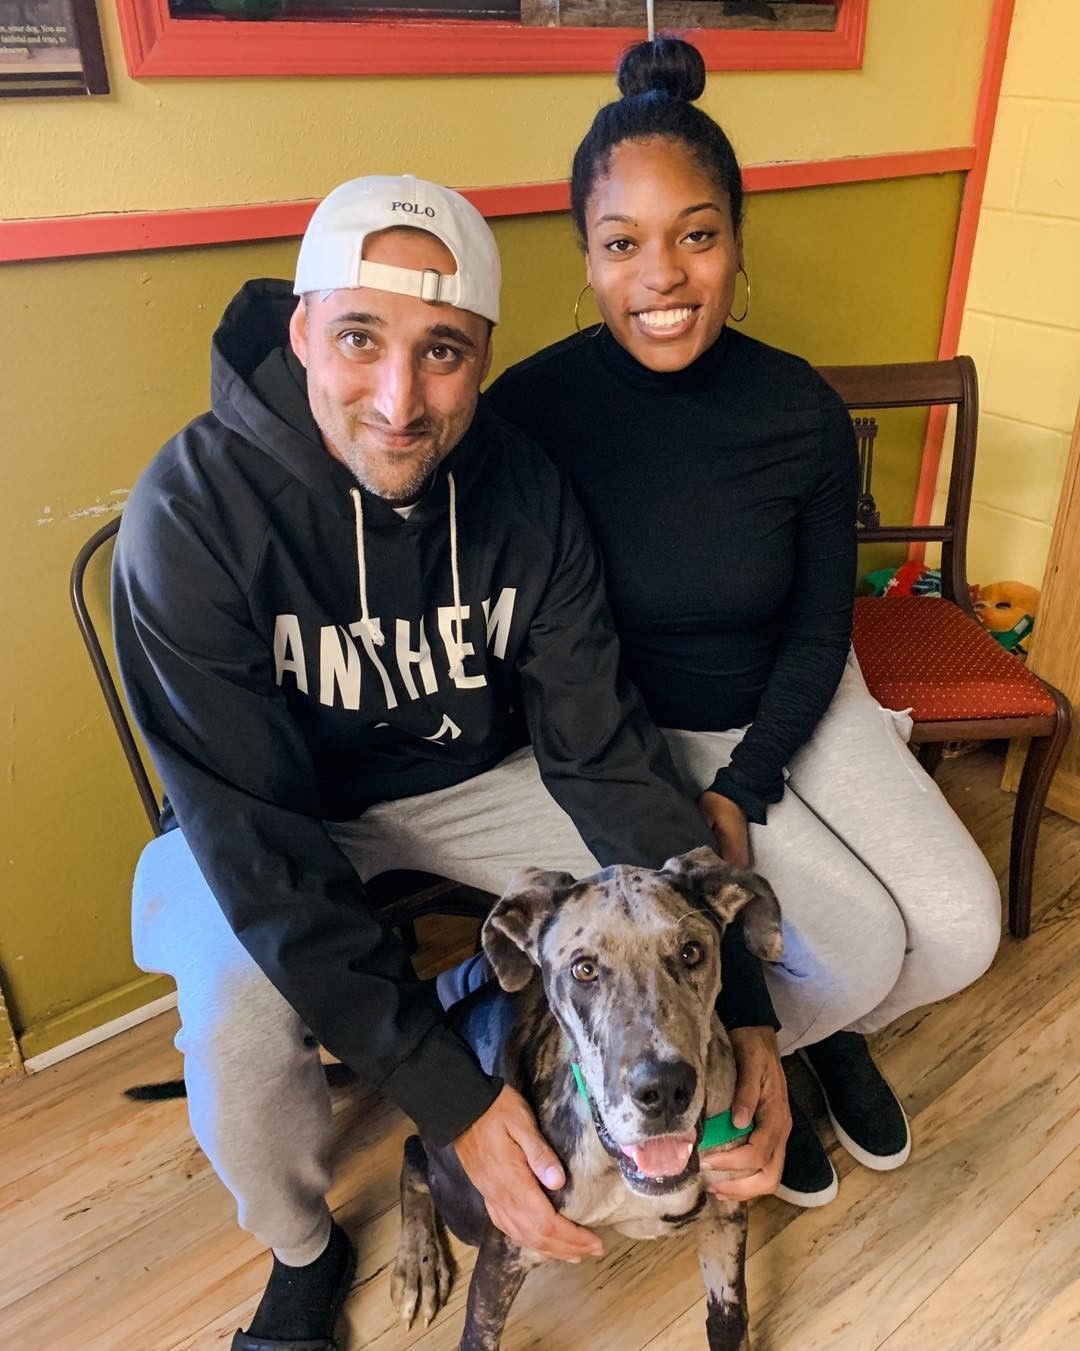 Cole was returned by his first adopters, but his new family was elated to have a chance to bring him home!! They showed up at the gate and took him home before we could even repost him here. Good luck, Cole!!